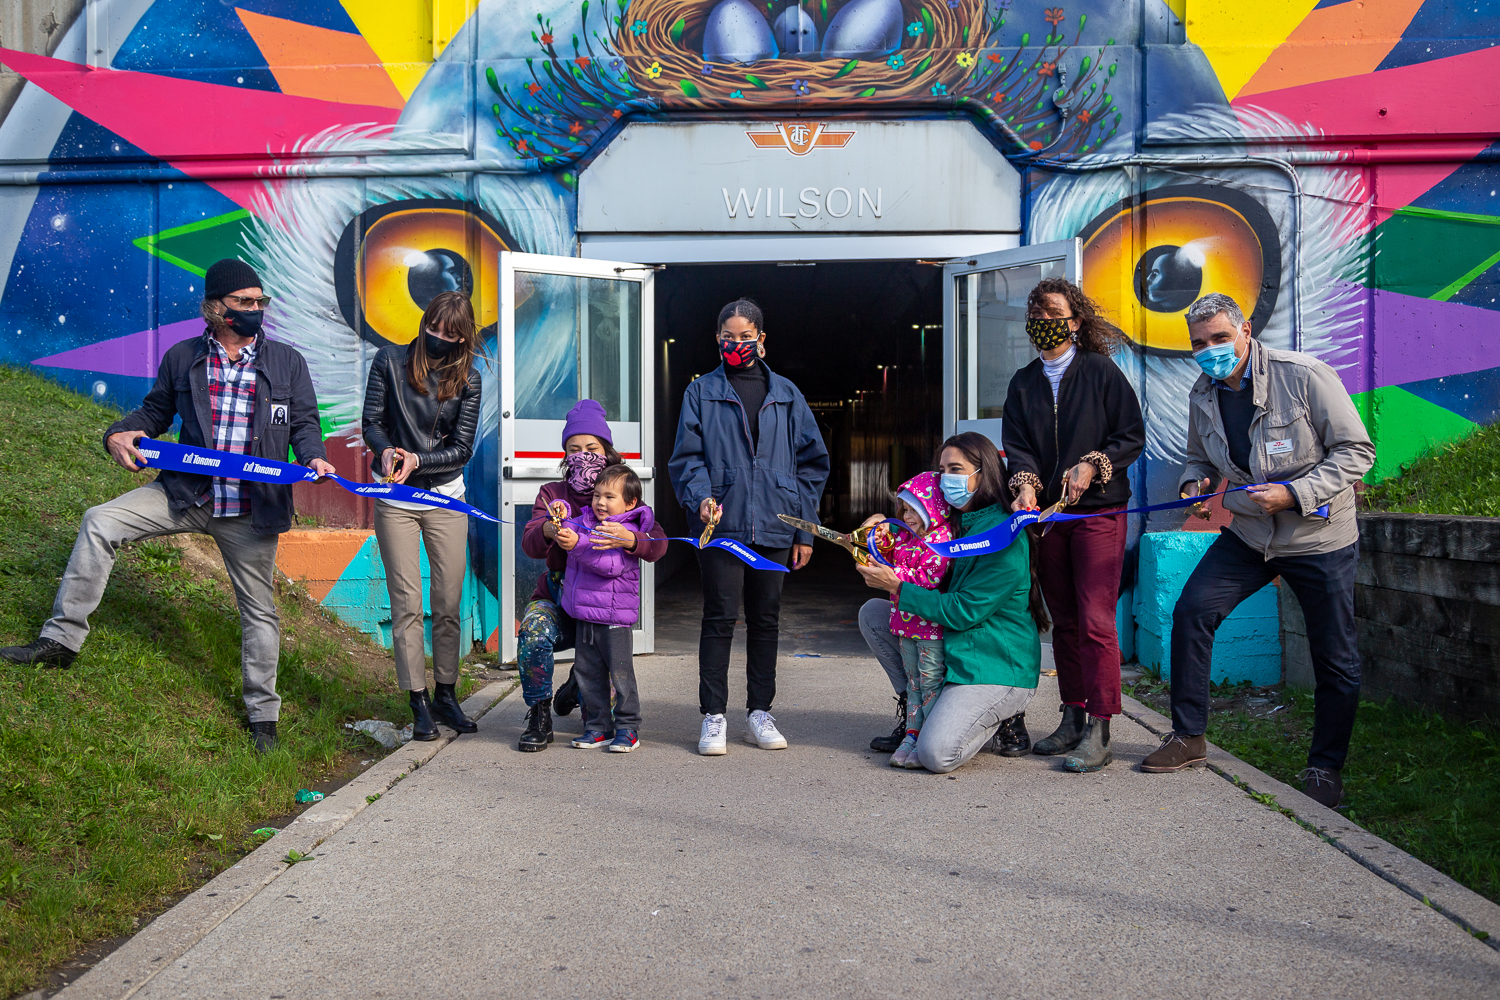 Shalak Attack and artist assistants Edan Maxam and Kseniya Tsoy with STEPS Public Art and the City of Toronto during a ribbon cutting ceremony for the unveiling of a new mural at Wilson TTC Station